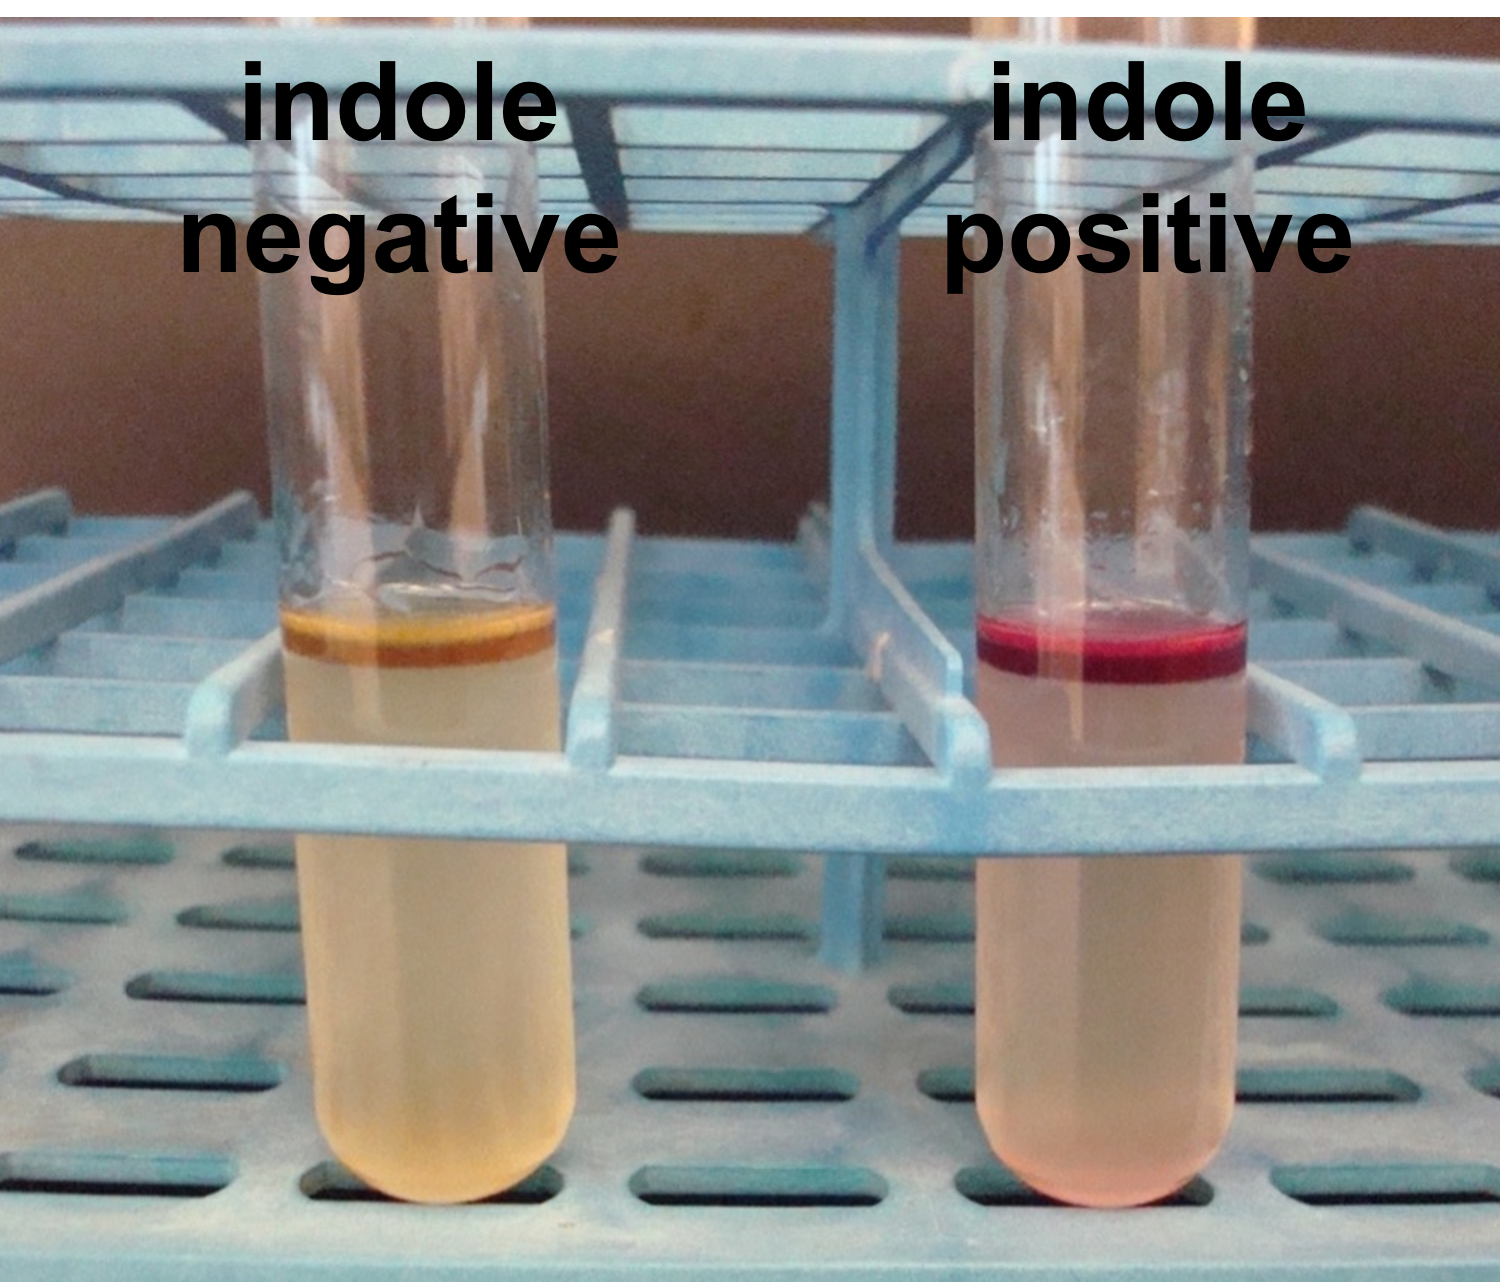 indole test results labeled as indole positive an indole negative